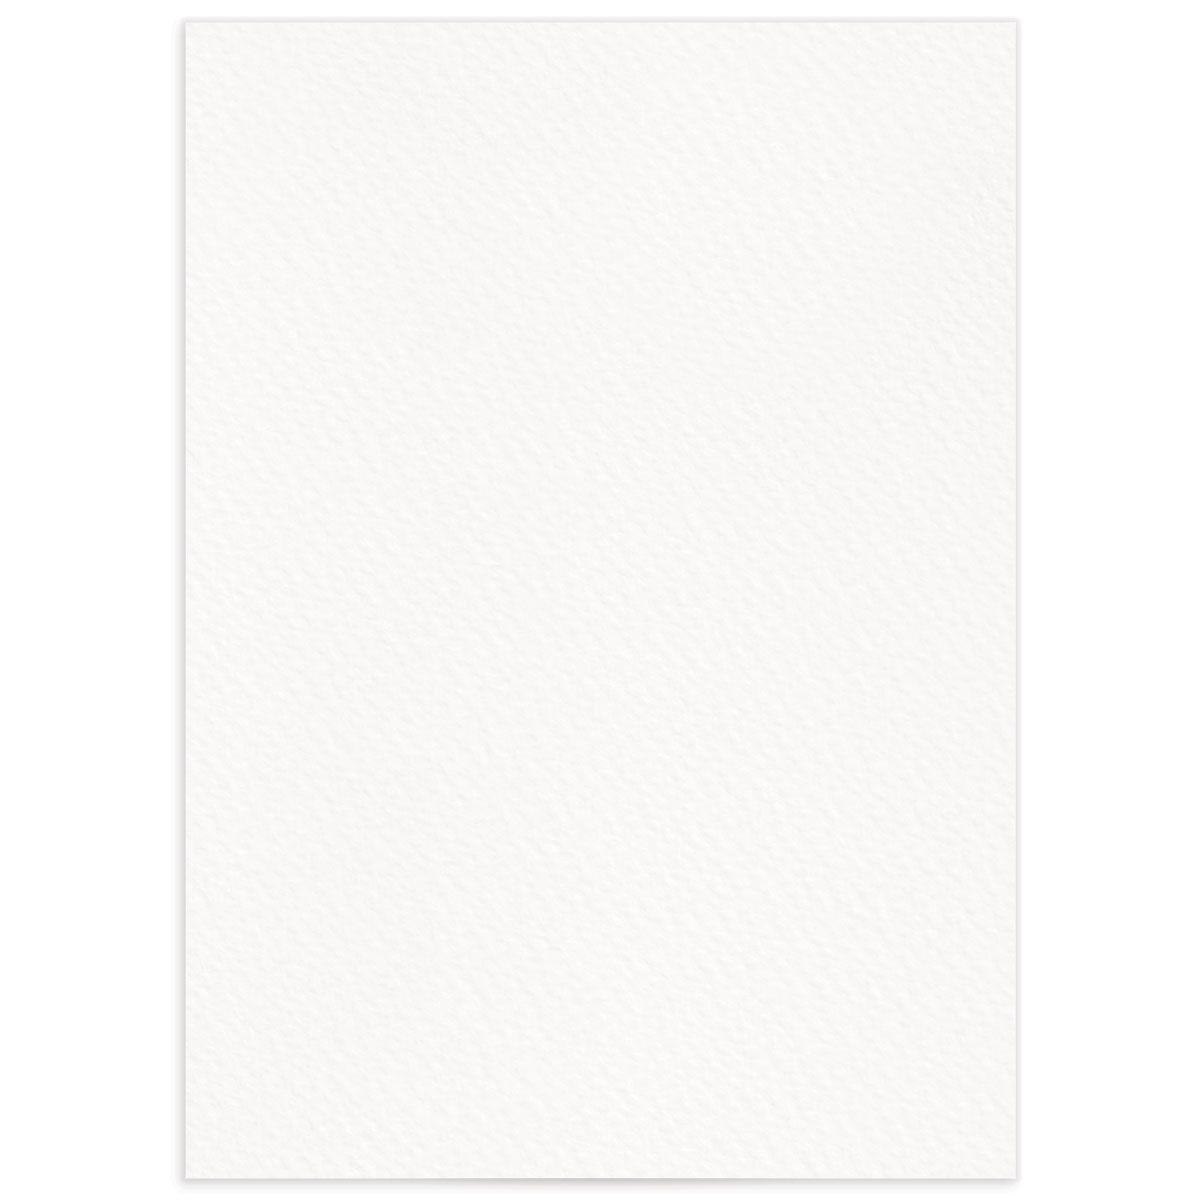 Floral Circles Wedding Response Cards back in Pure White